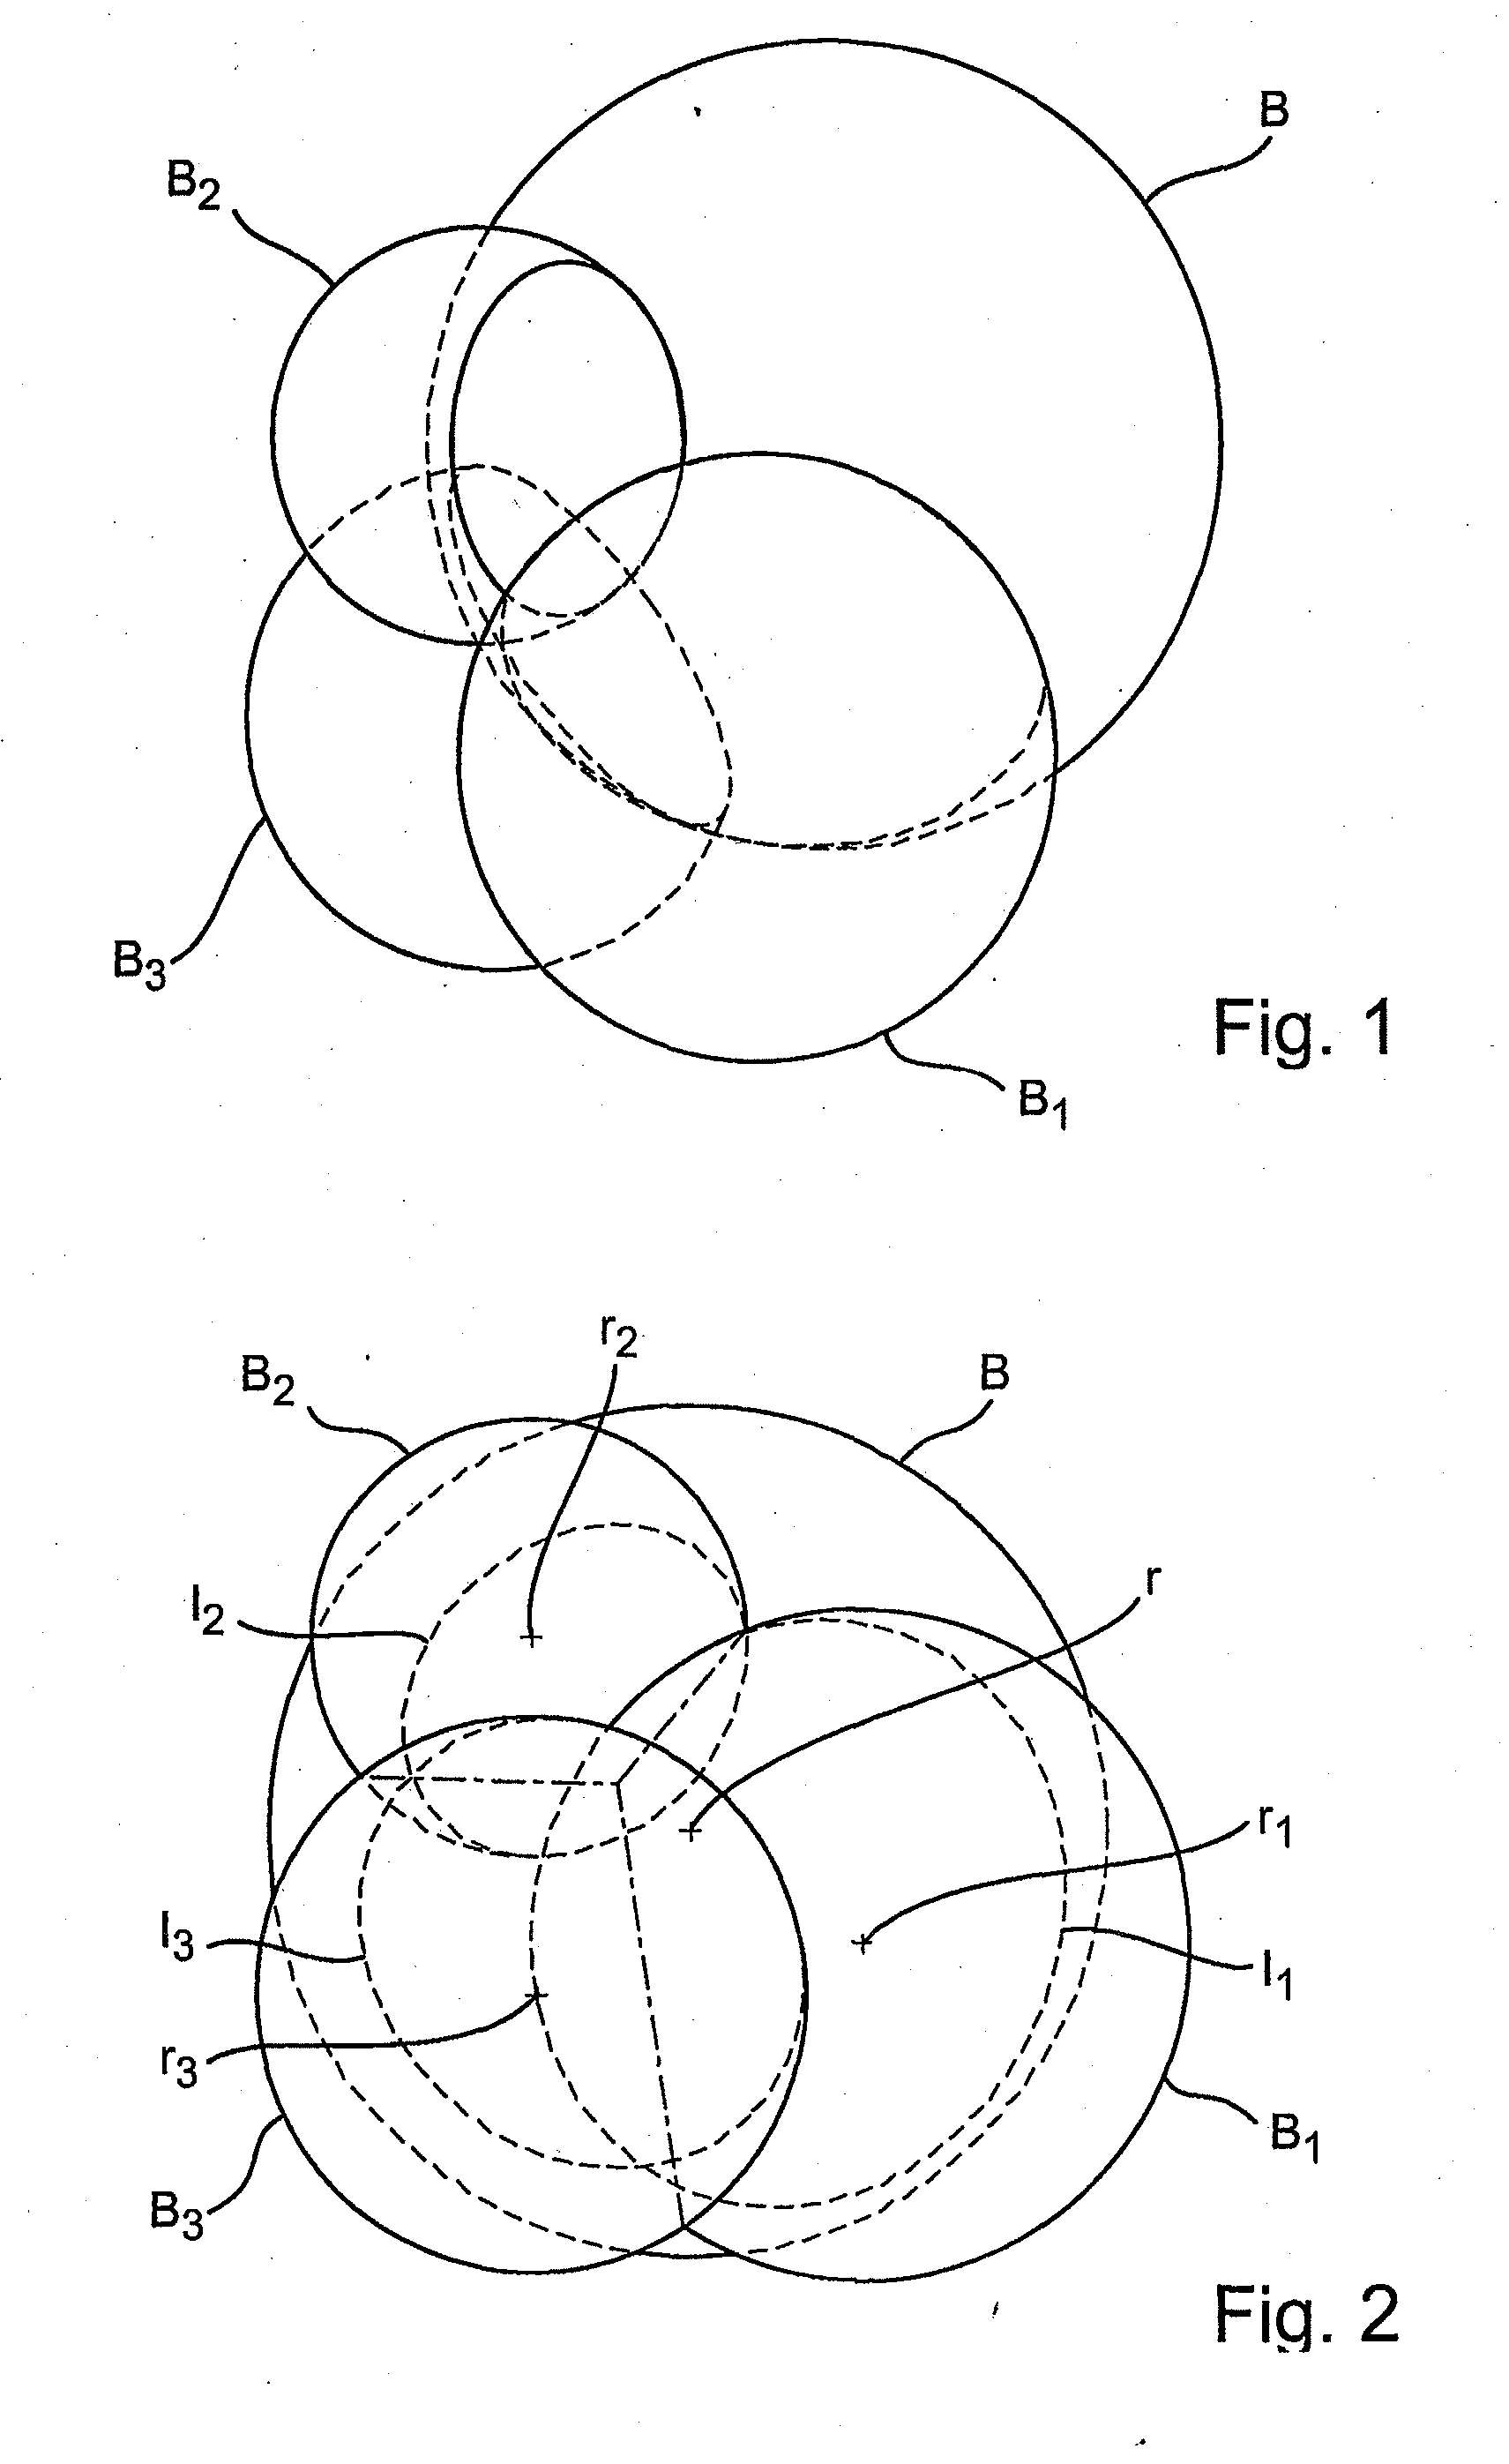 Method and system for determining the solvent accessible surface area and its derivatives of a molecule